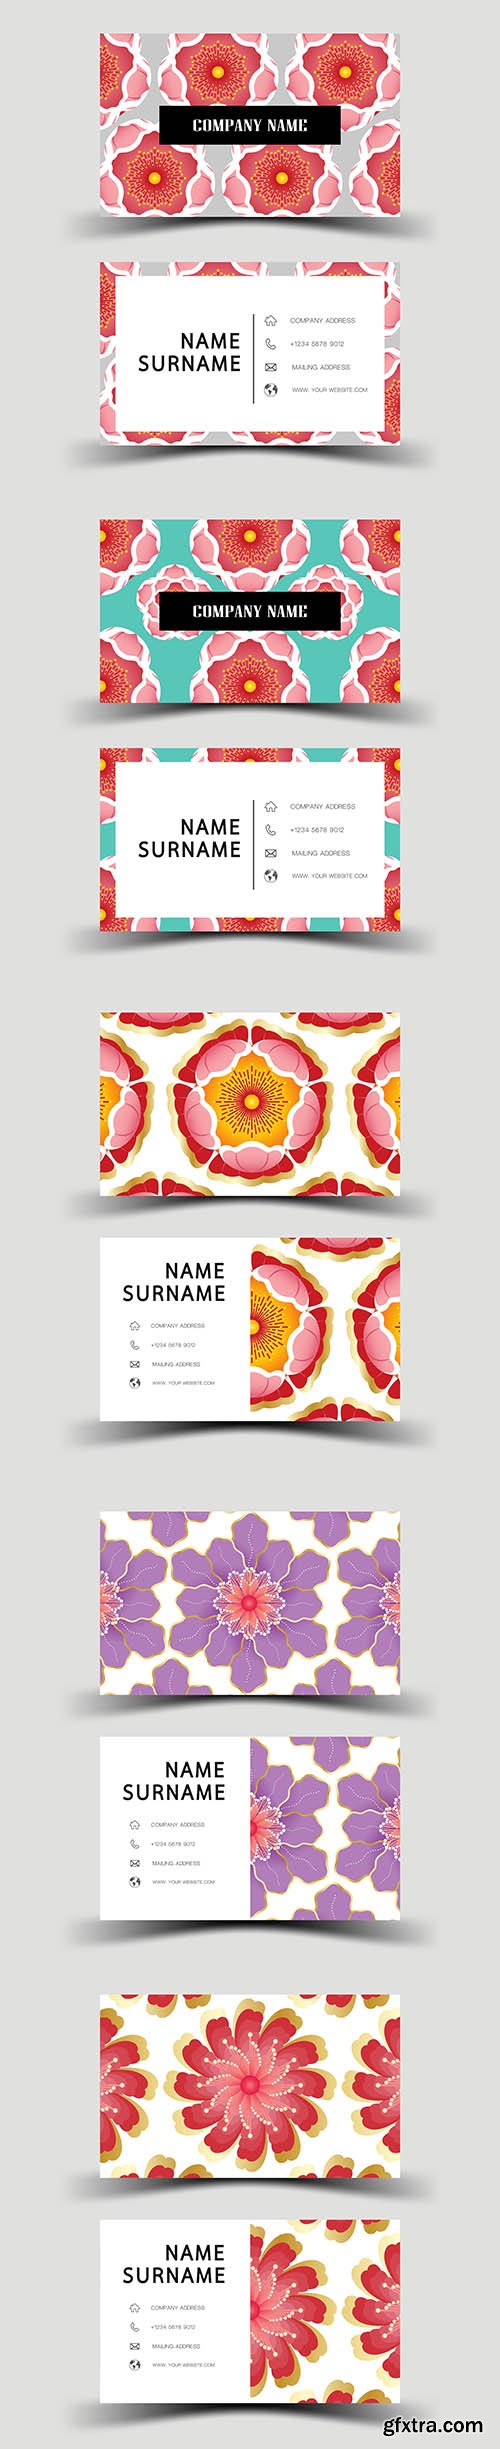 Business Card Design with Flower Background